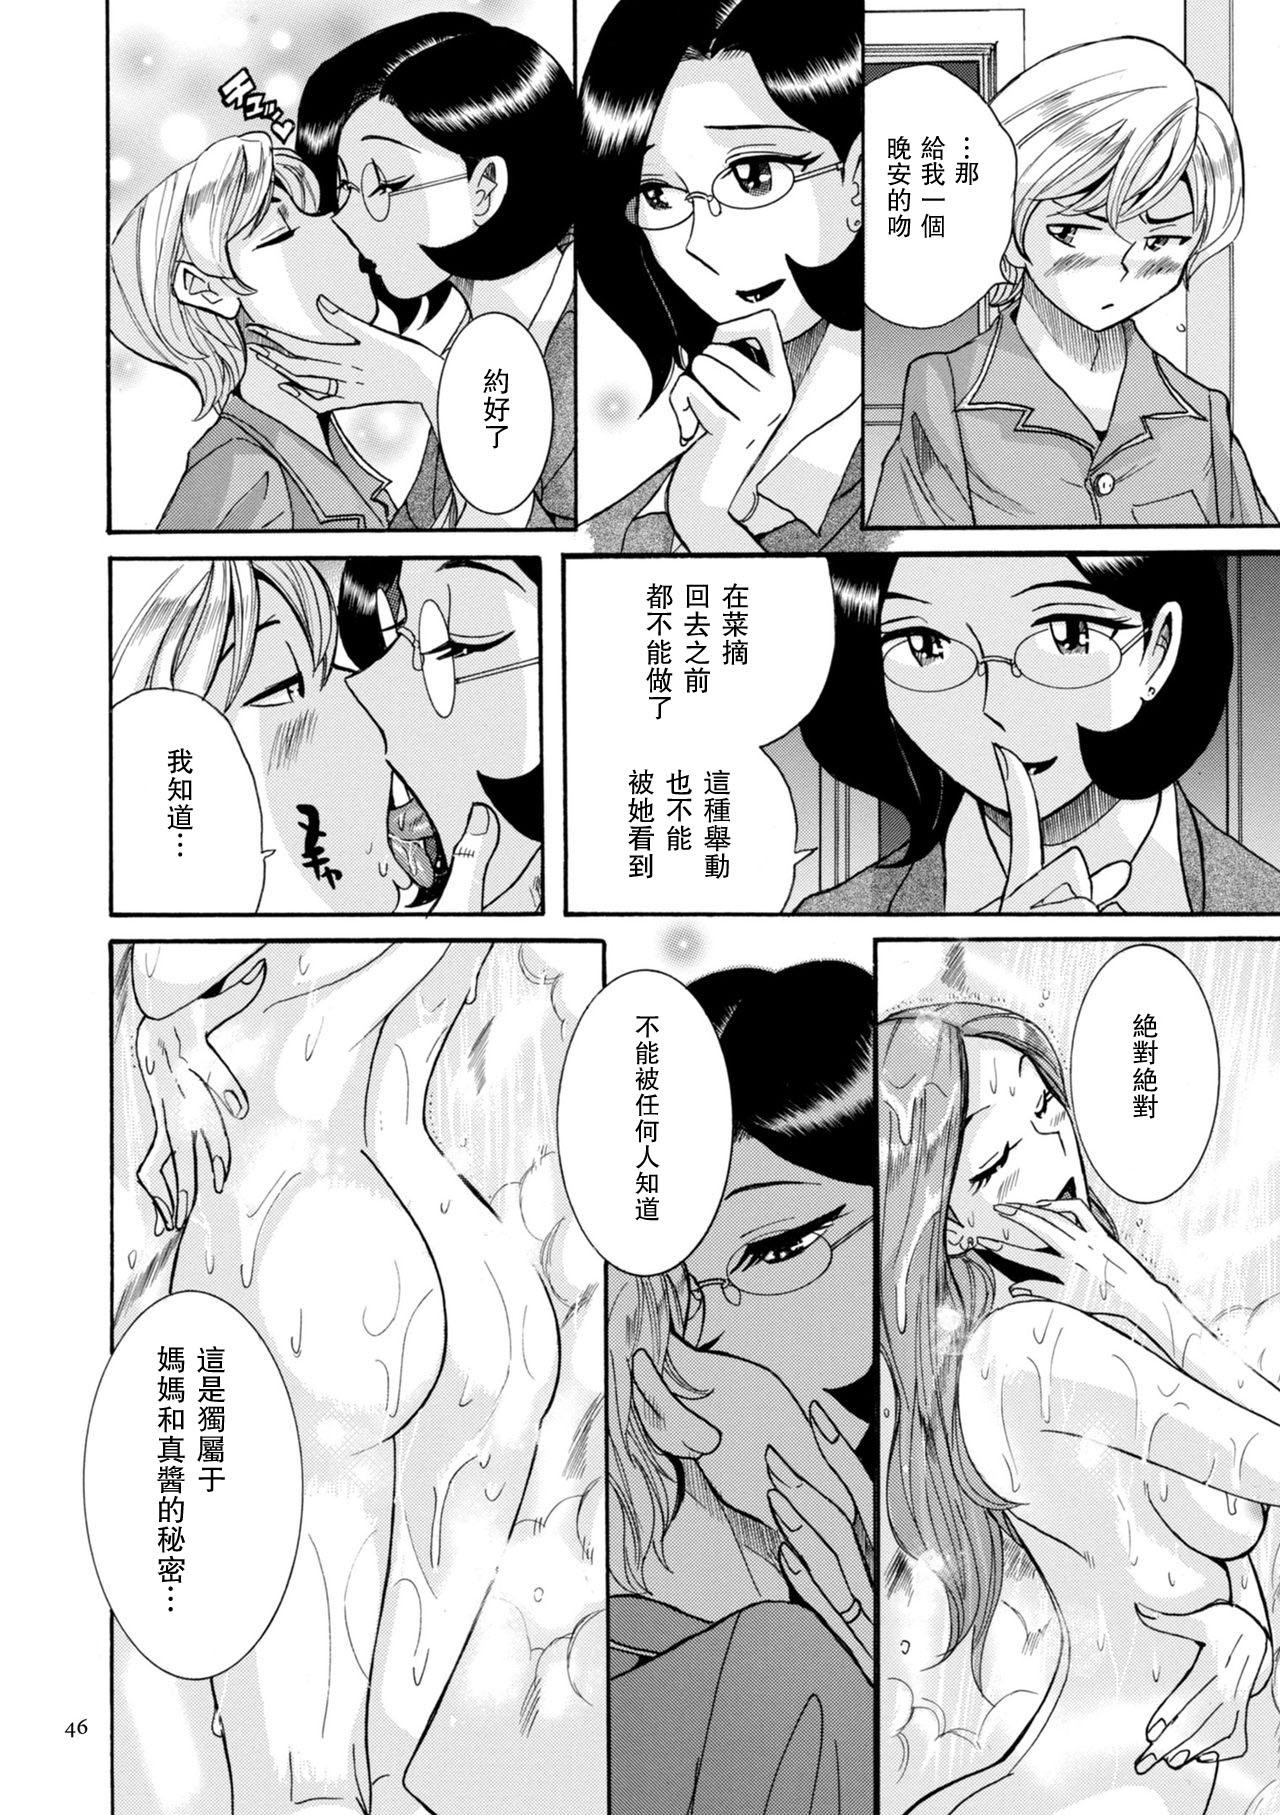 Family Roleplay ニンフォママン 母子相姦ーママの子宮は僕のモノ ch 3 4 Cock - Page 2